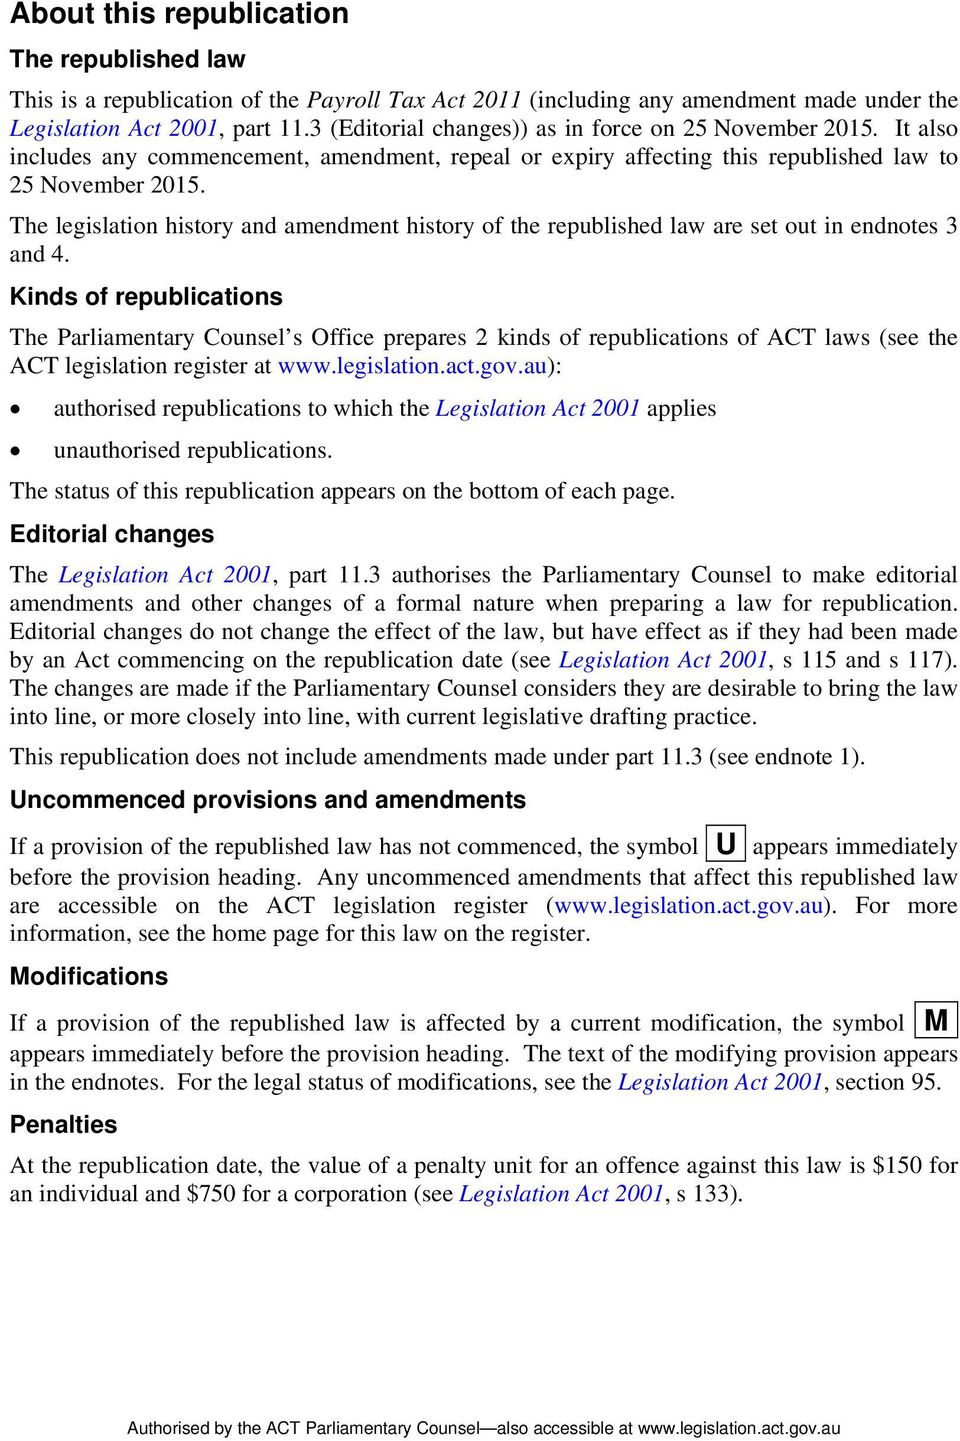 The legislation history and amendment history of the republished law are set out in endnotes 3 and 4.